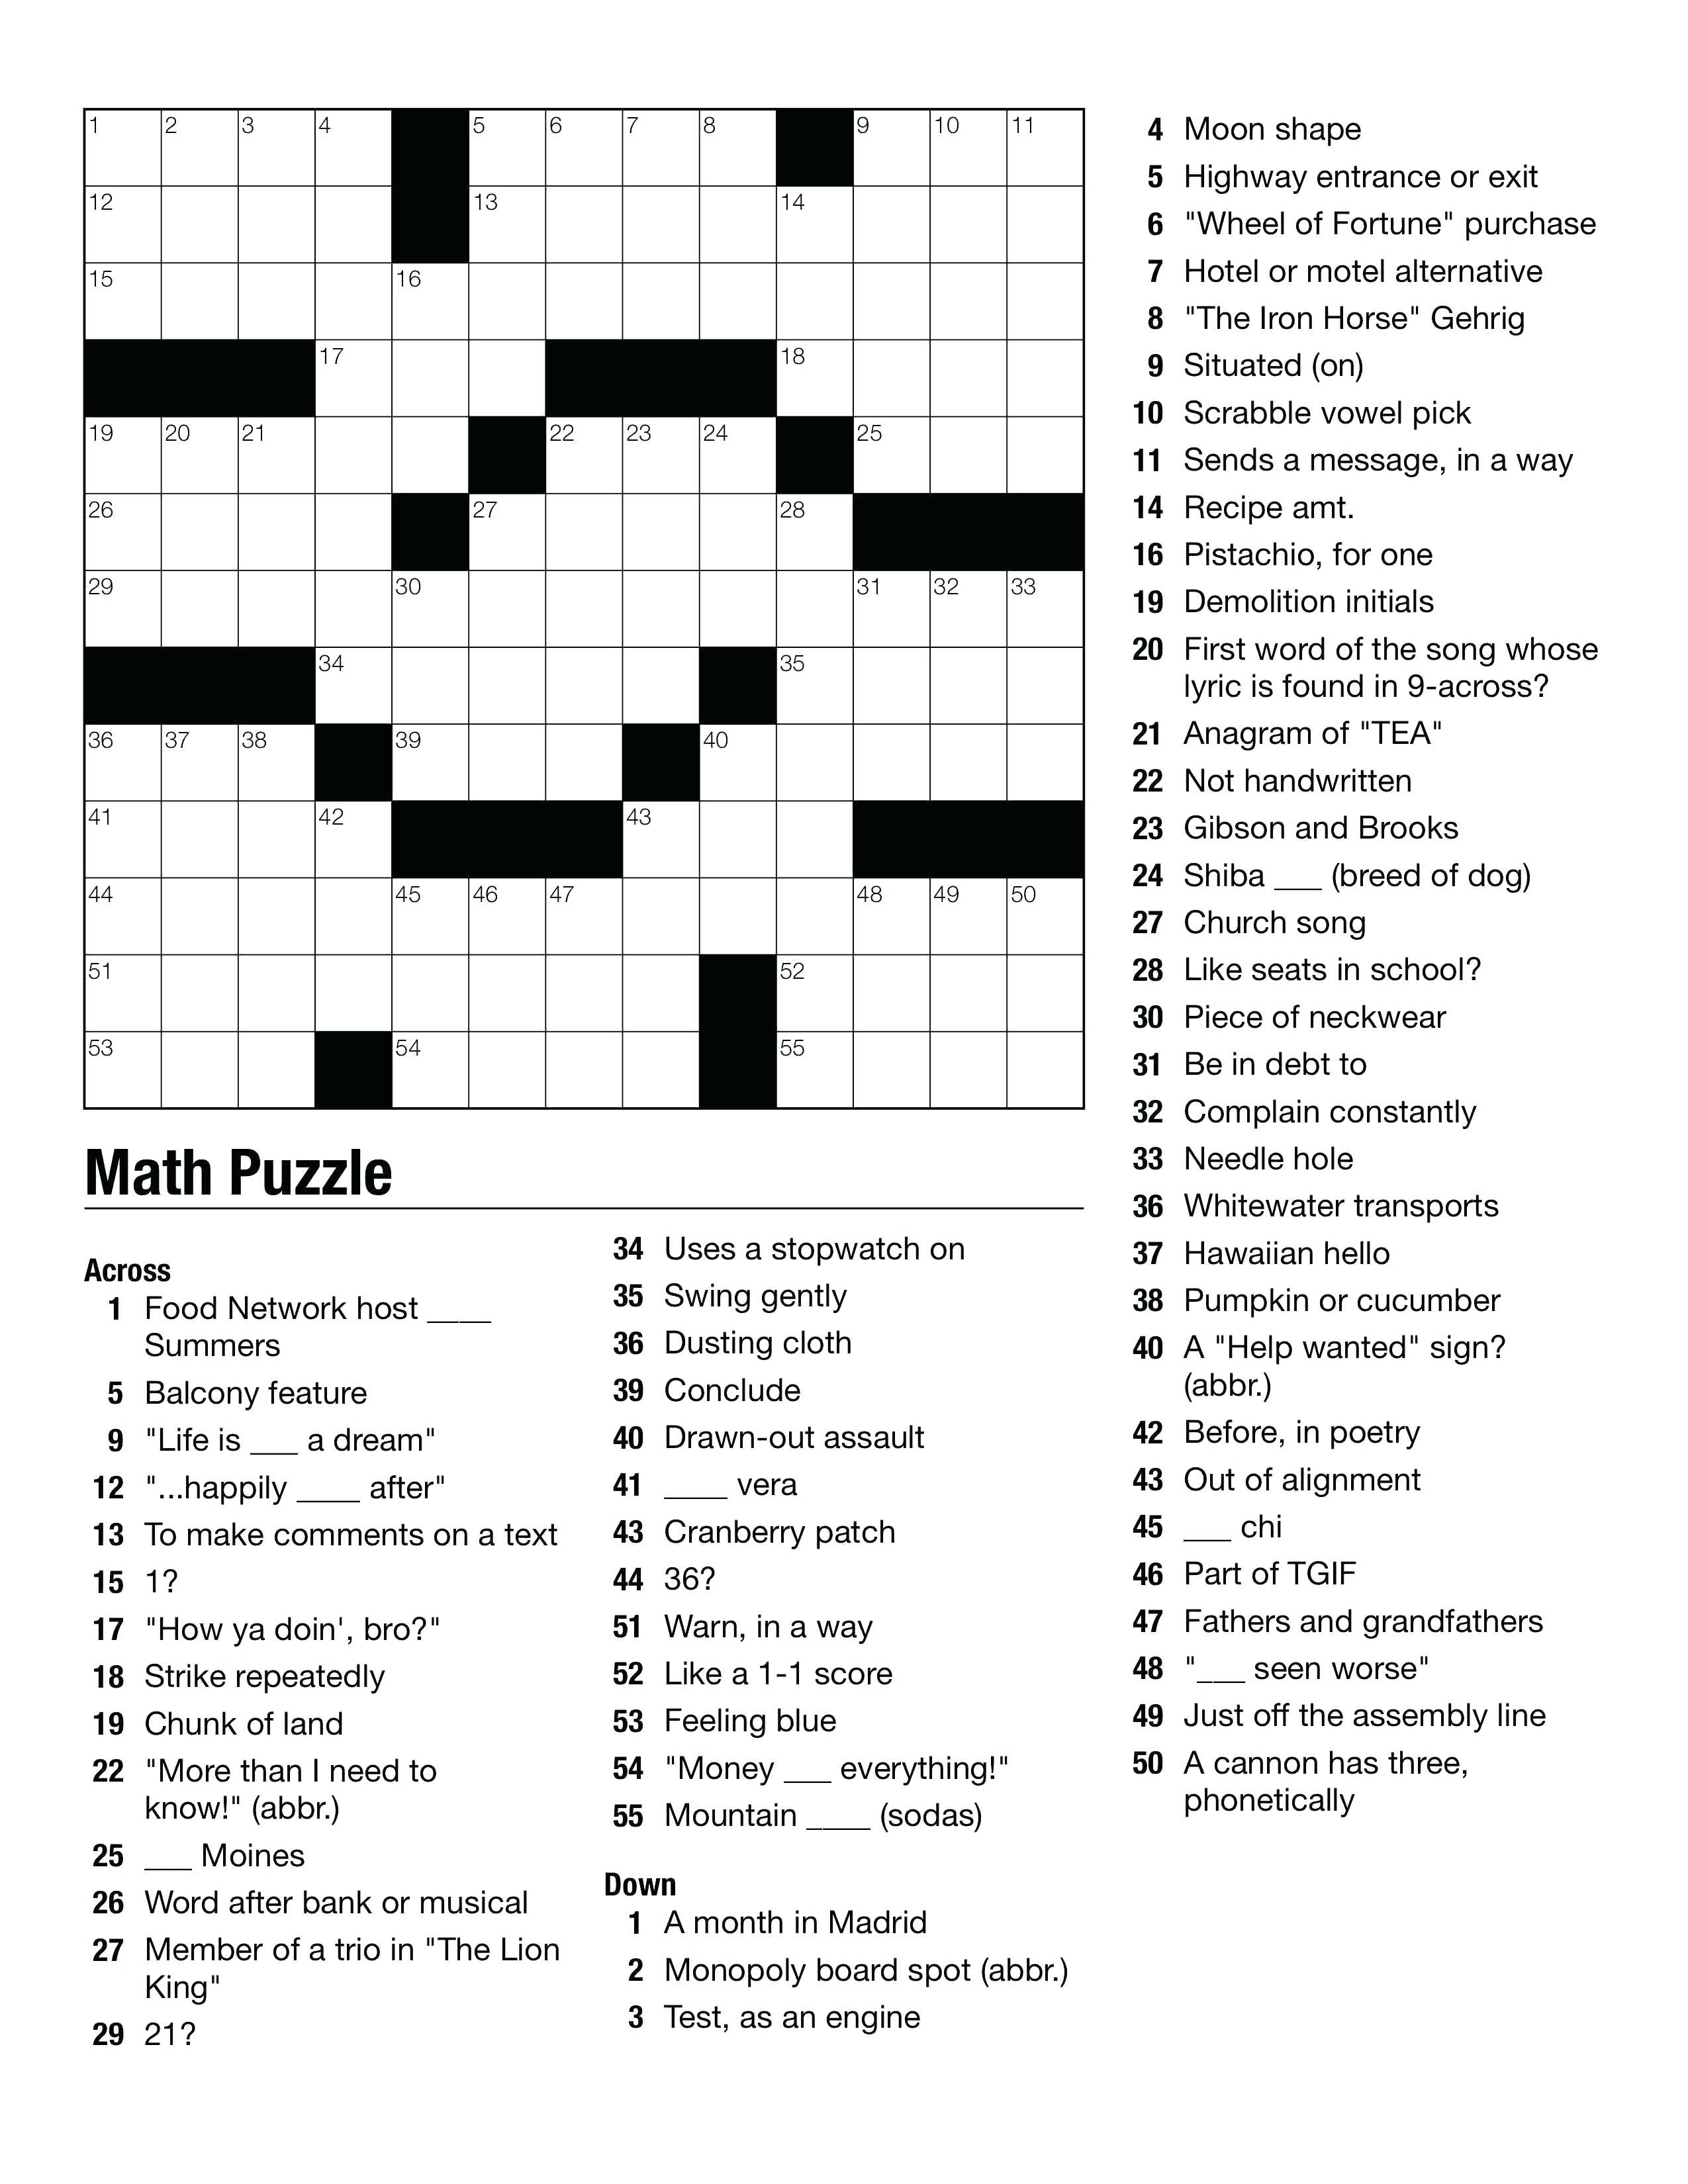 Geometry Puzzles Math Geometry Images Teaching Ideas On Crossword - Printable Puzzles For High School Students